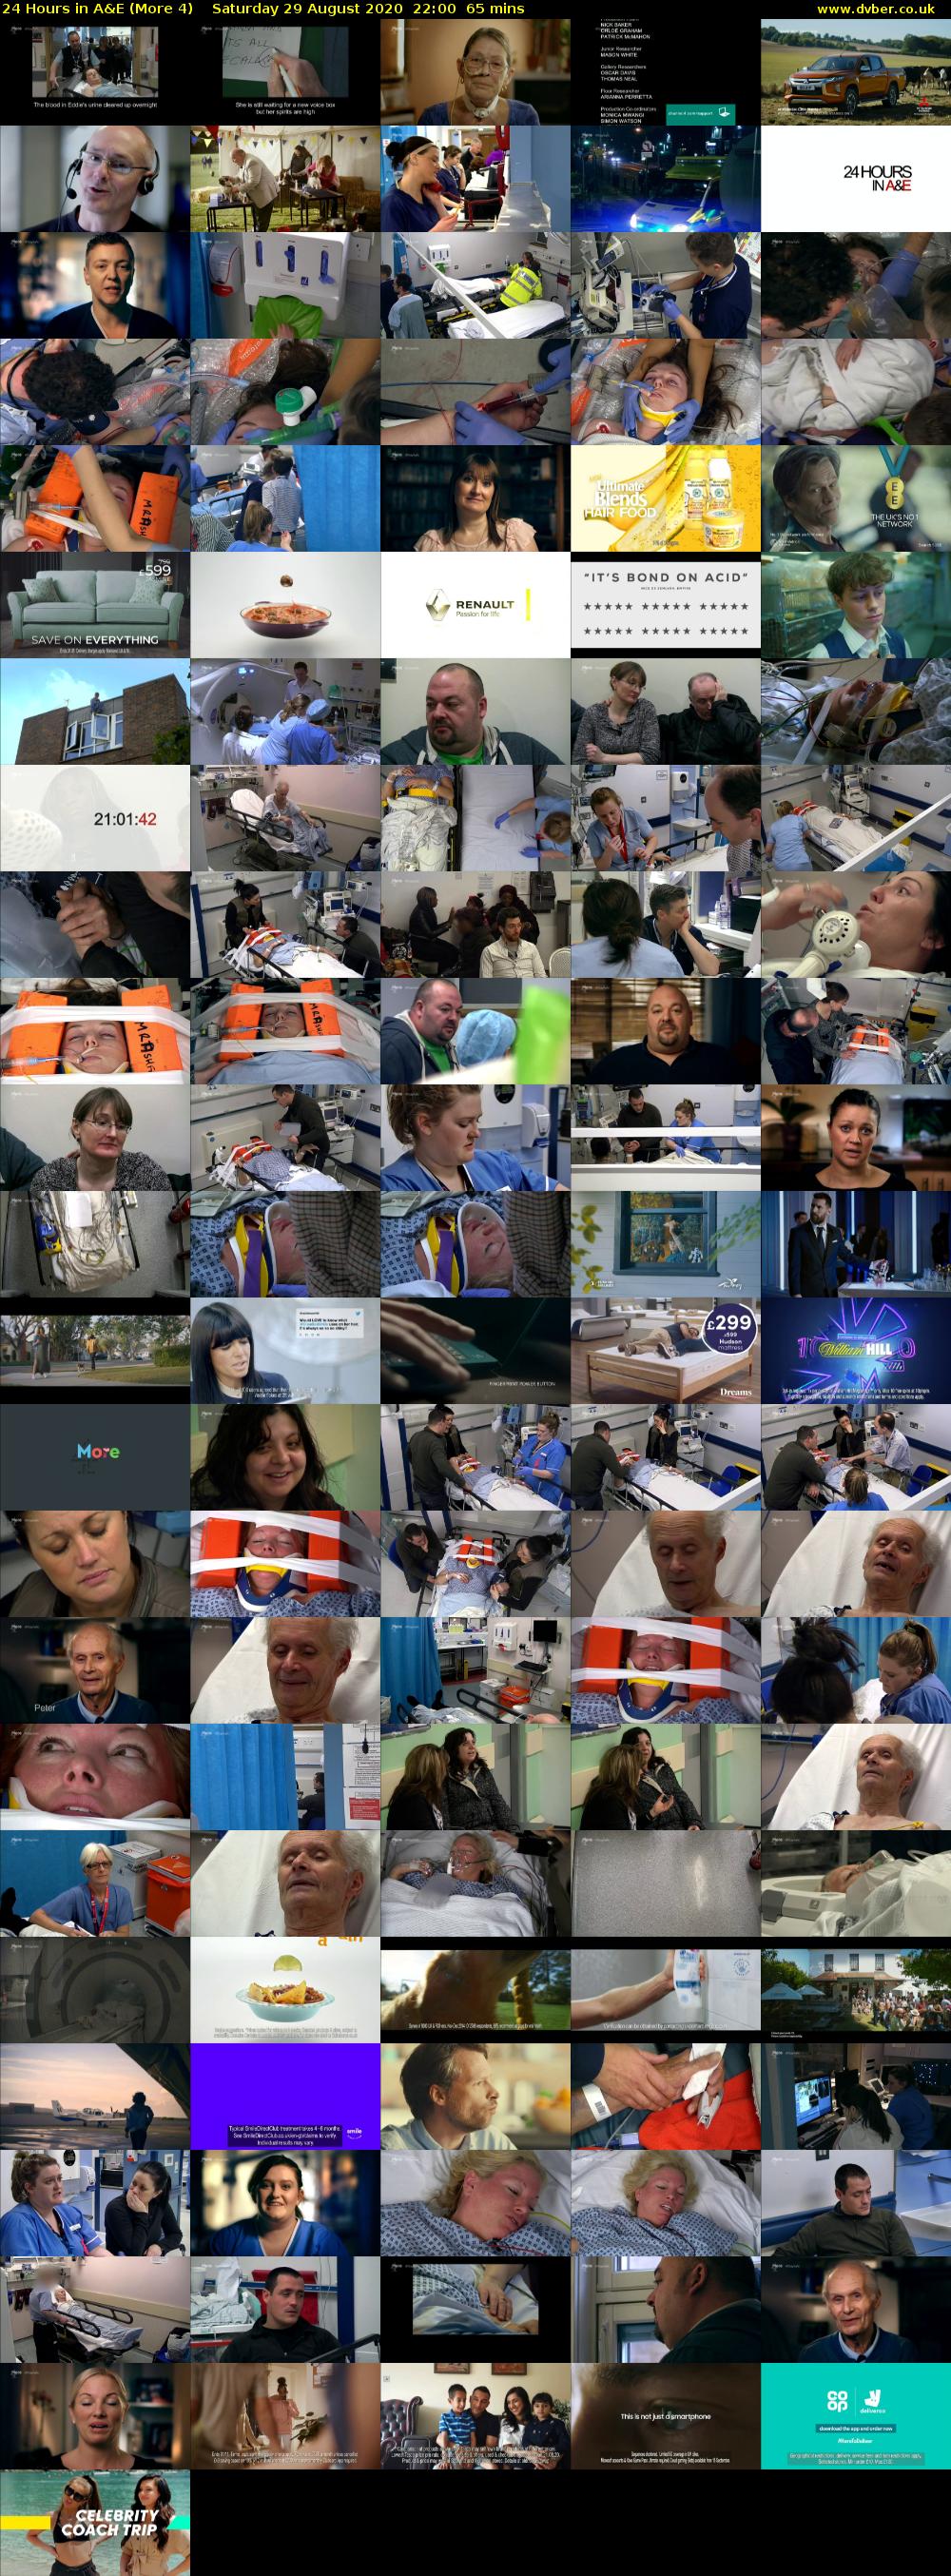 24 Hours in A&E (More 4) Saturday 29 August 2020 22:00 - 23:05